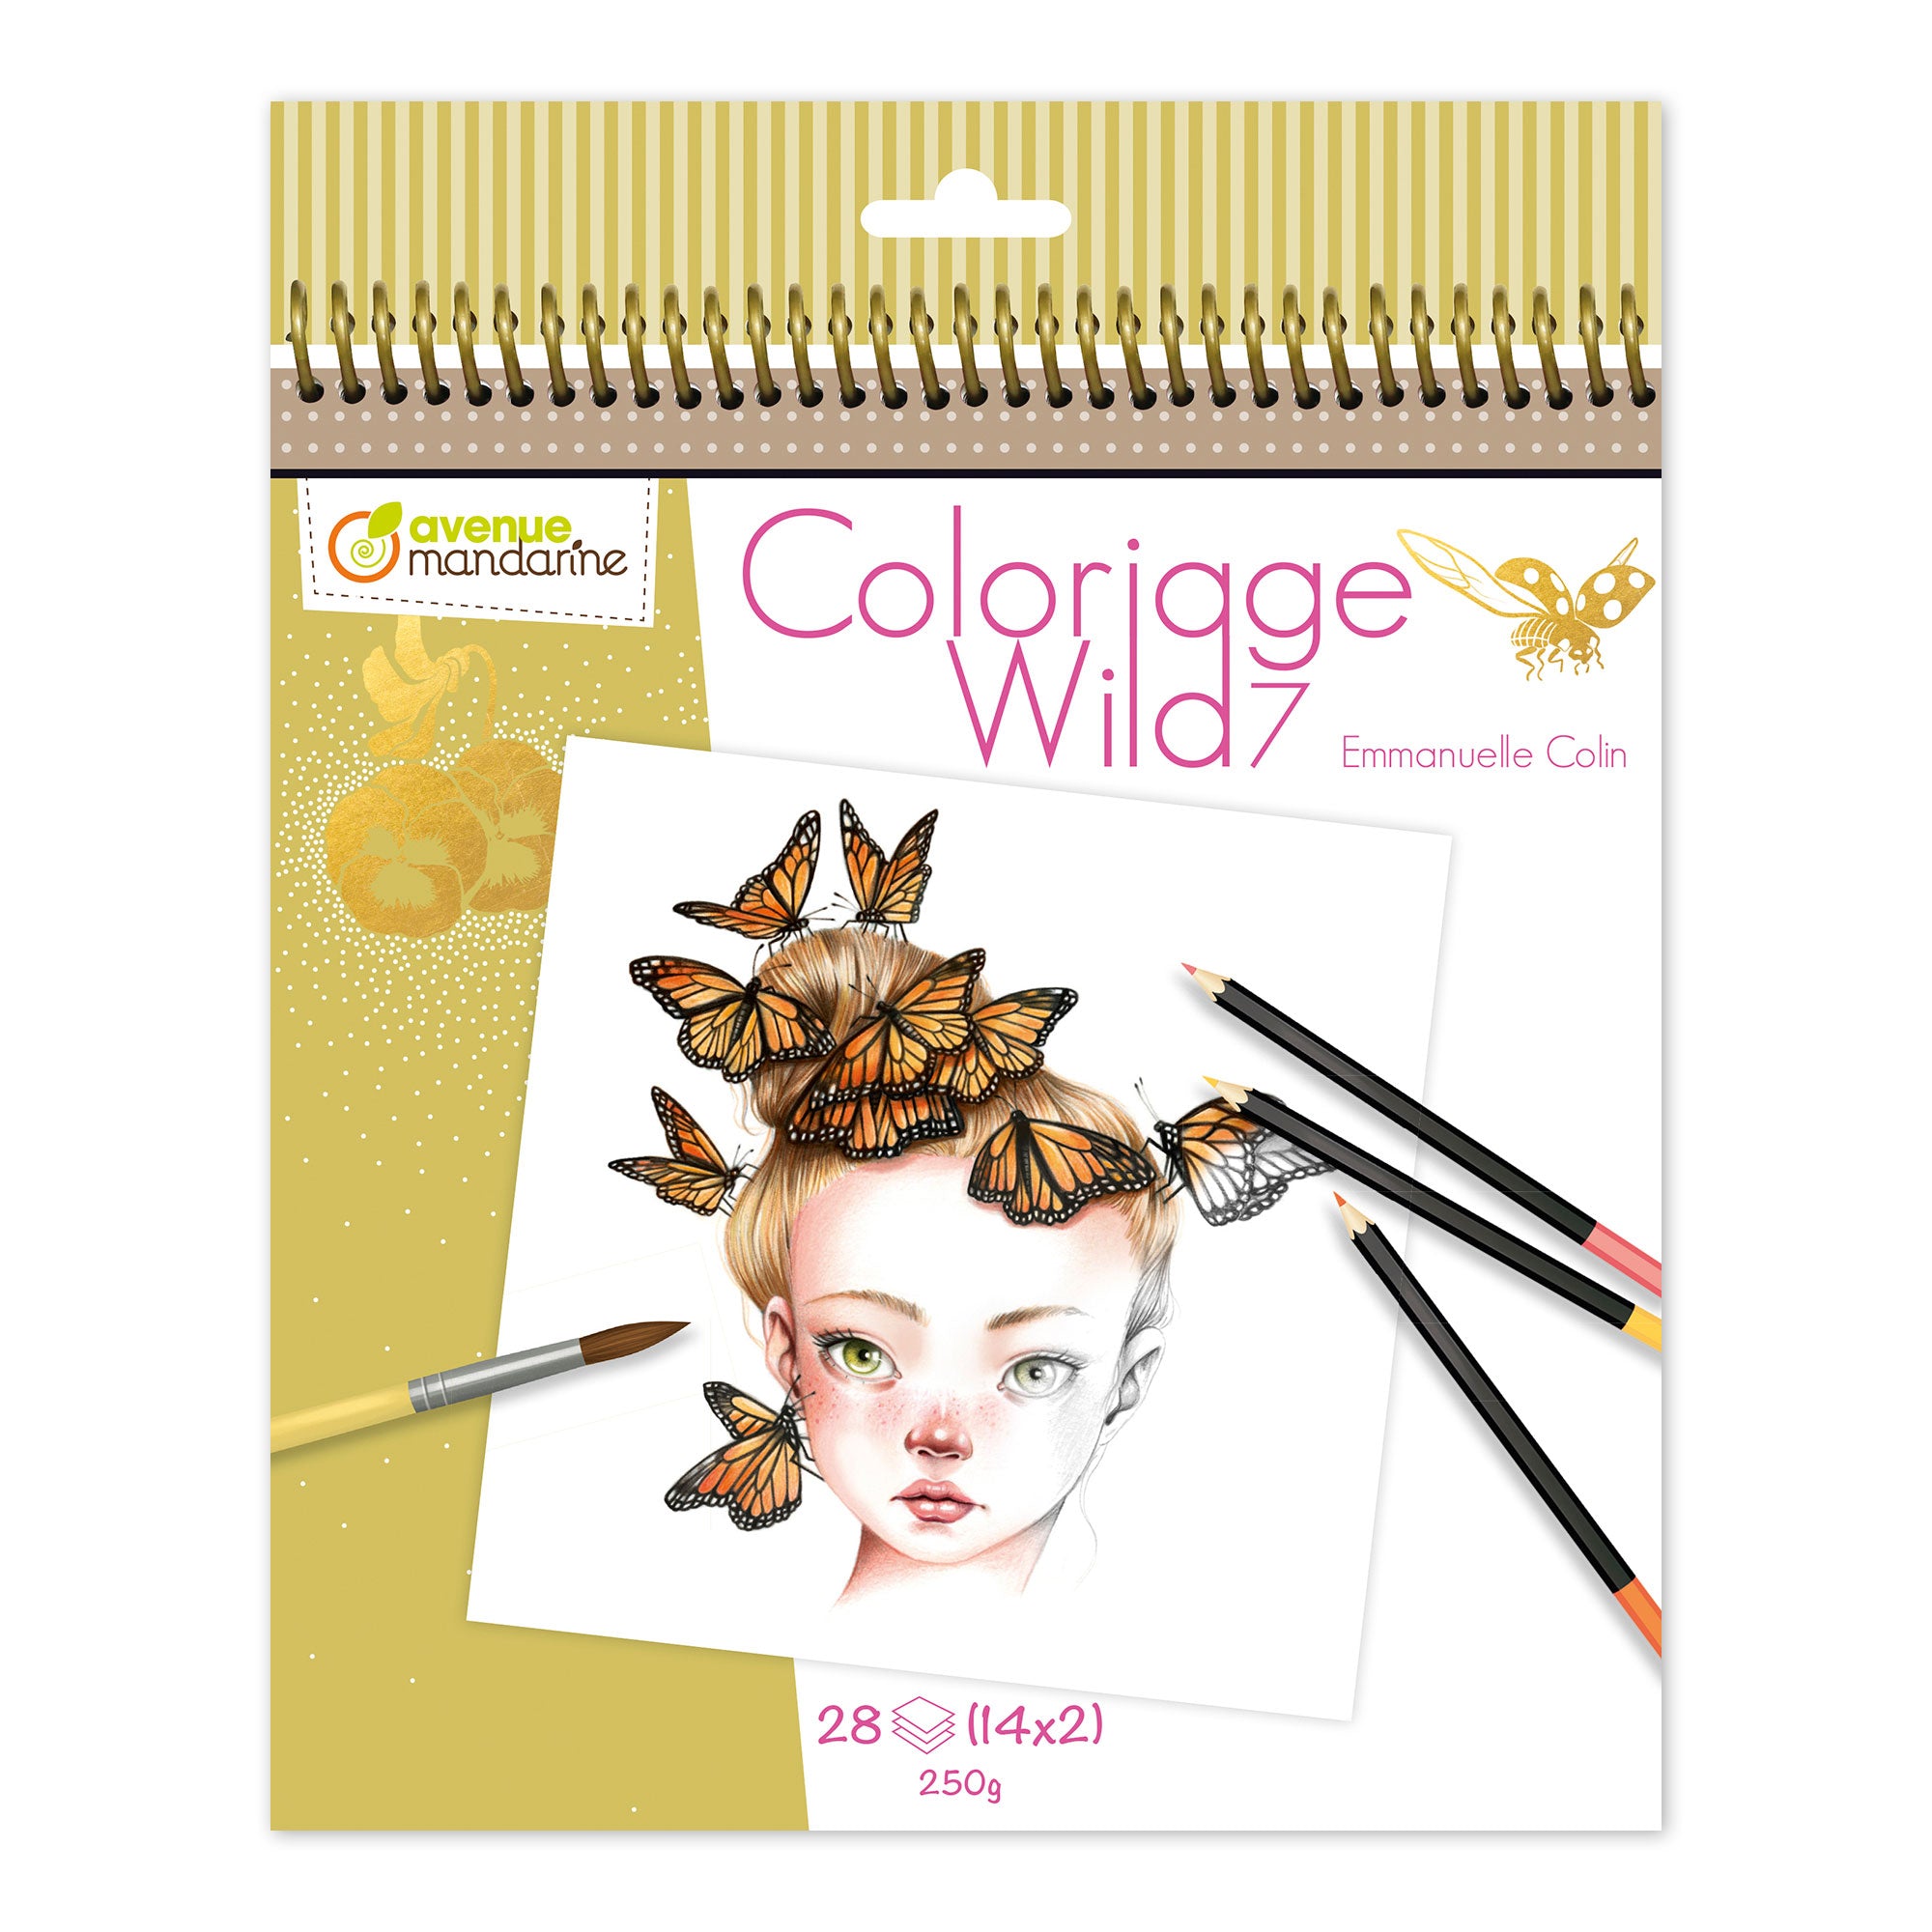 Coloriage Wild 4 Colouring Book by Emmanuelle Colin